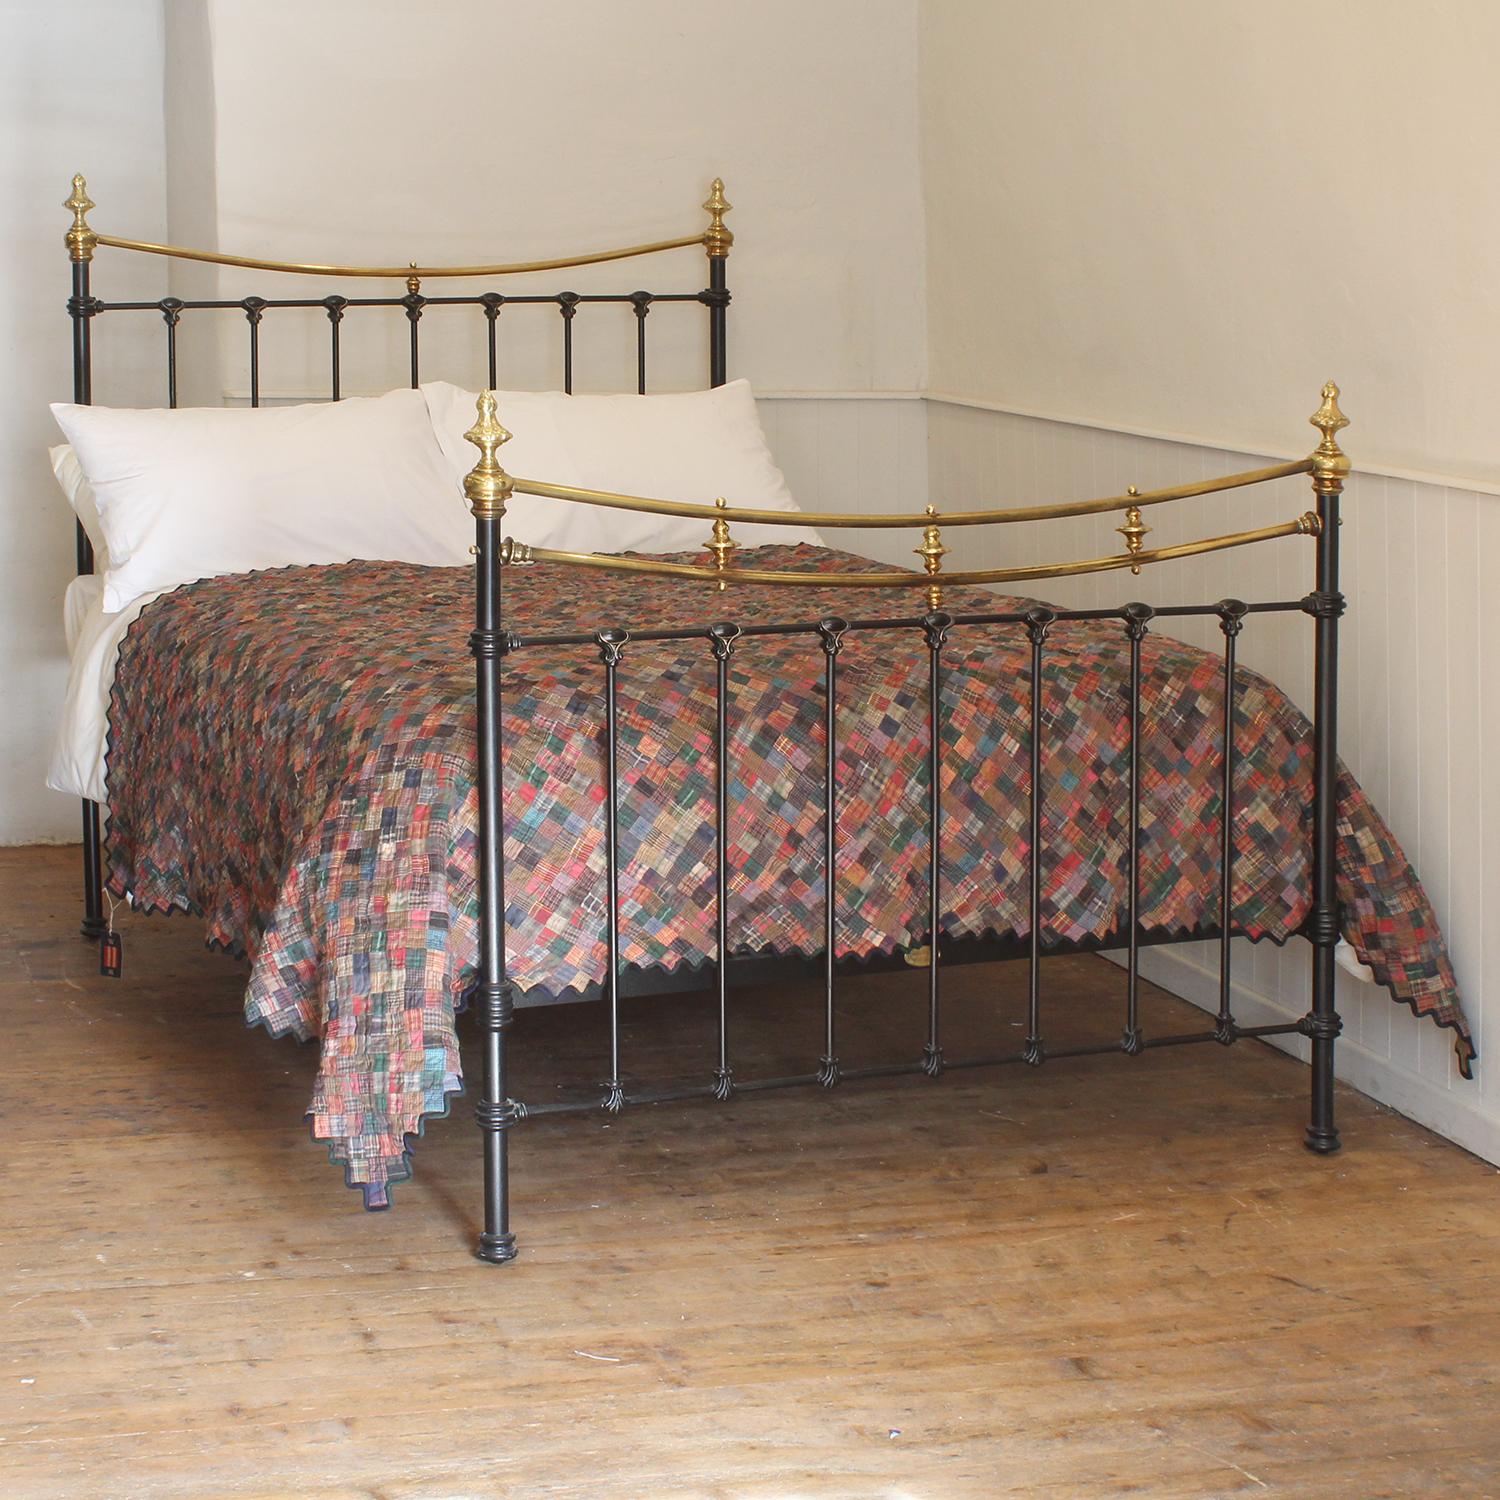 A Victorian brass and cast iron bedstead finished in black with curved brass top rails and decorative castings.

This bed accepts a double size 4ft 6in wide (54 inch or 135cm) base and mattress. 

The price includes a firm standard bed base to